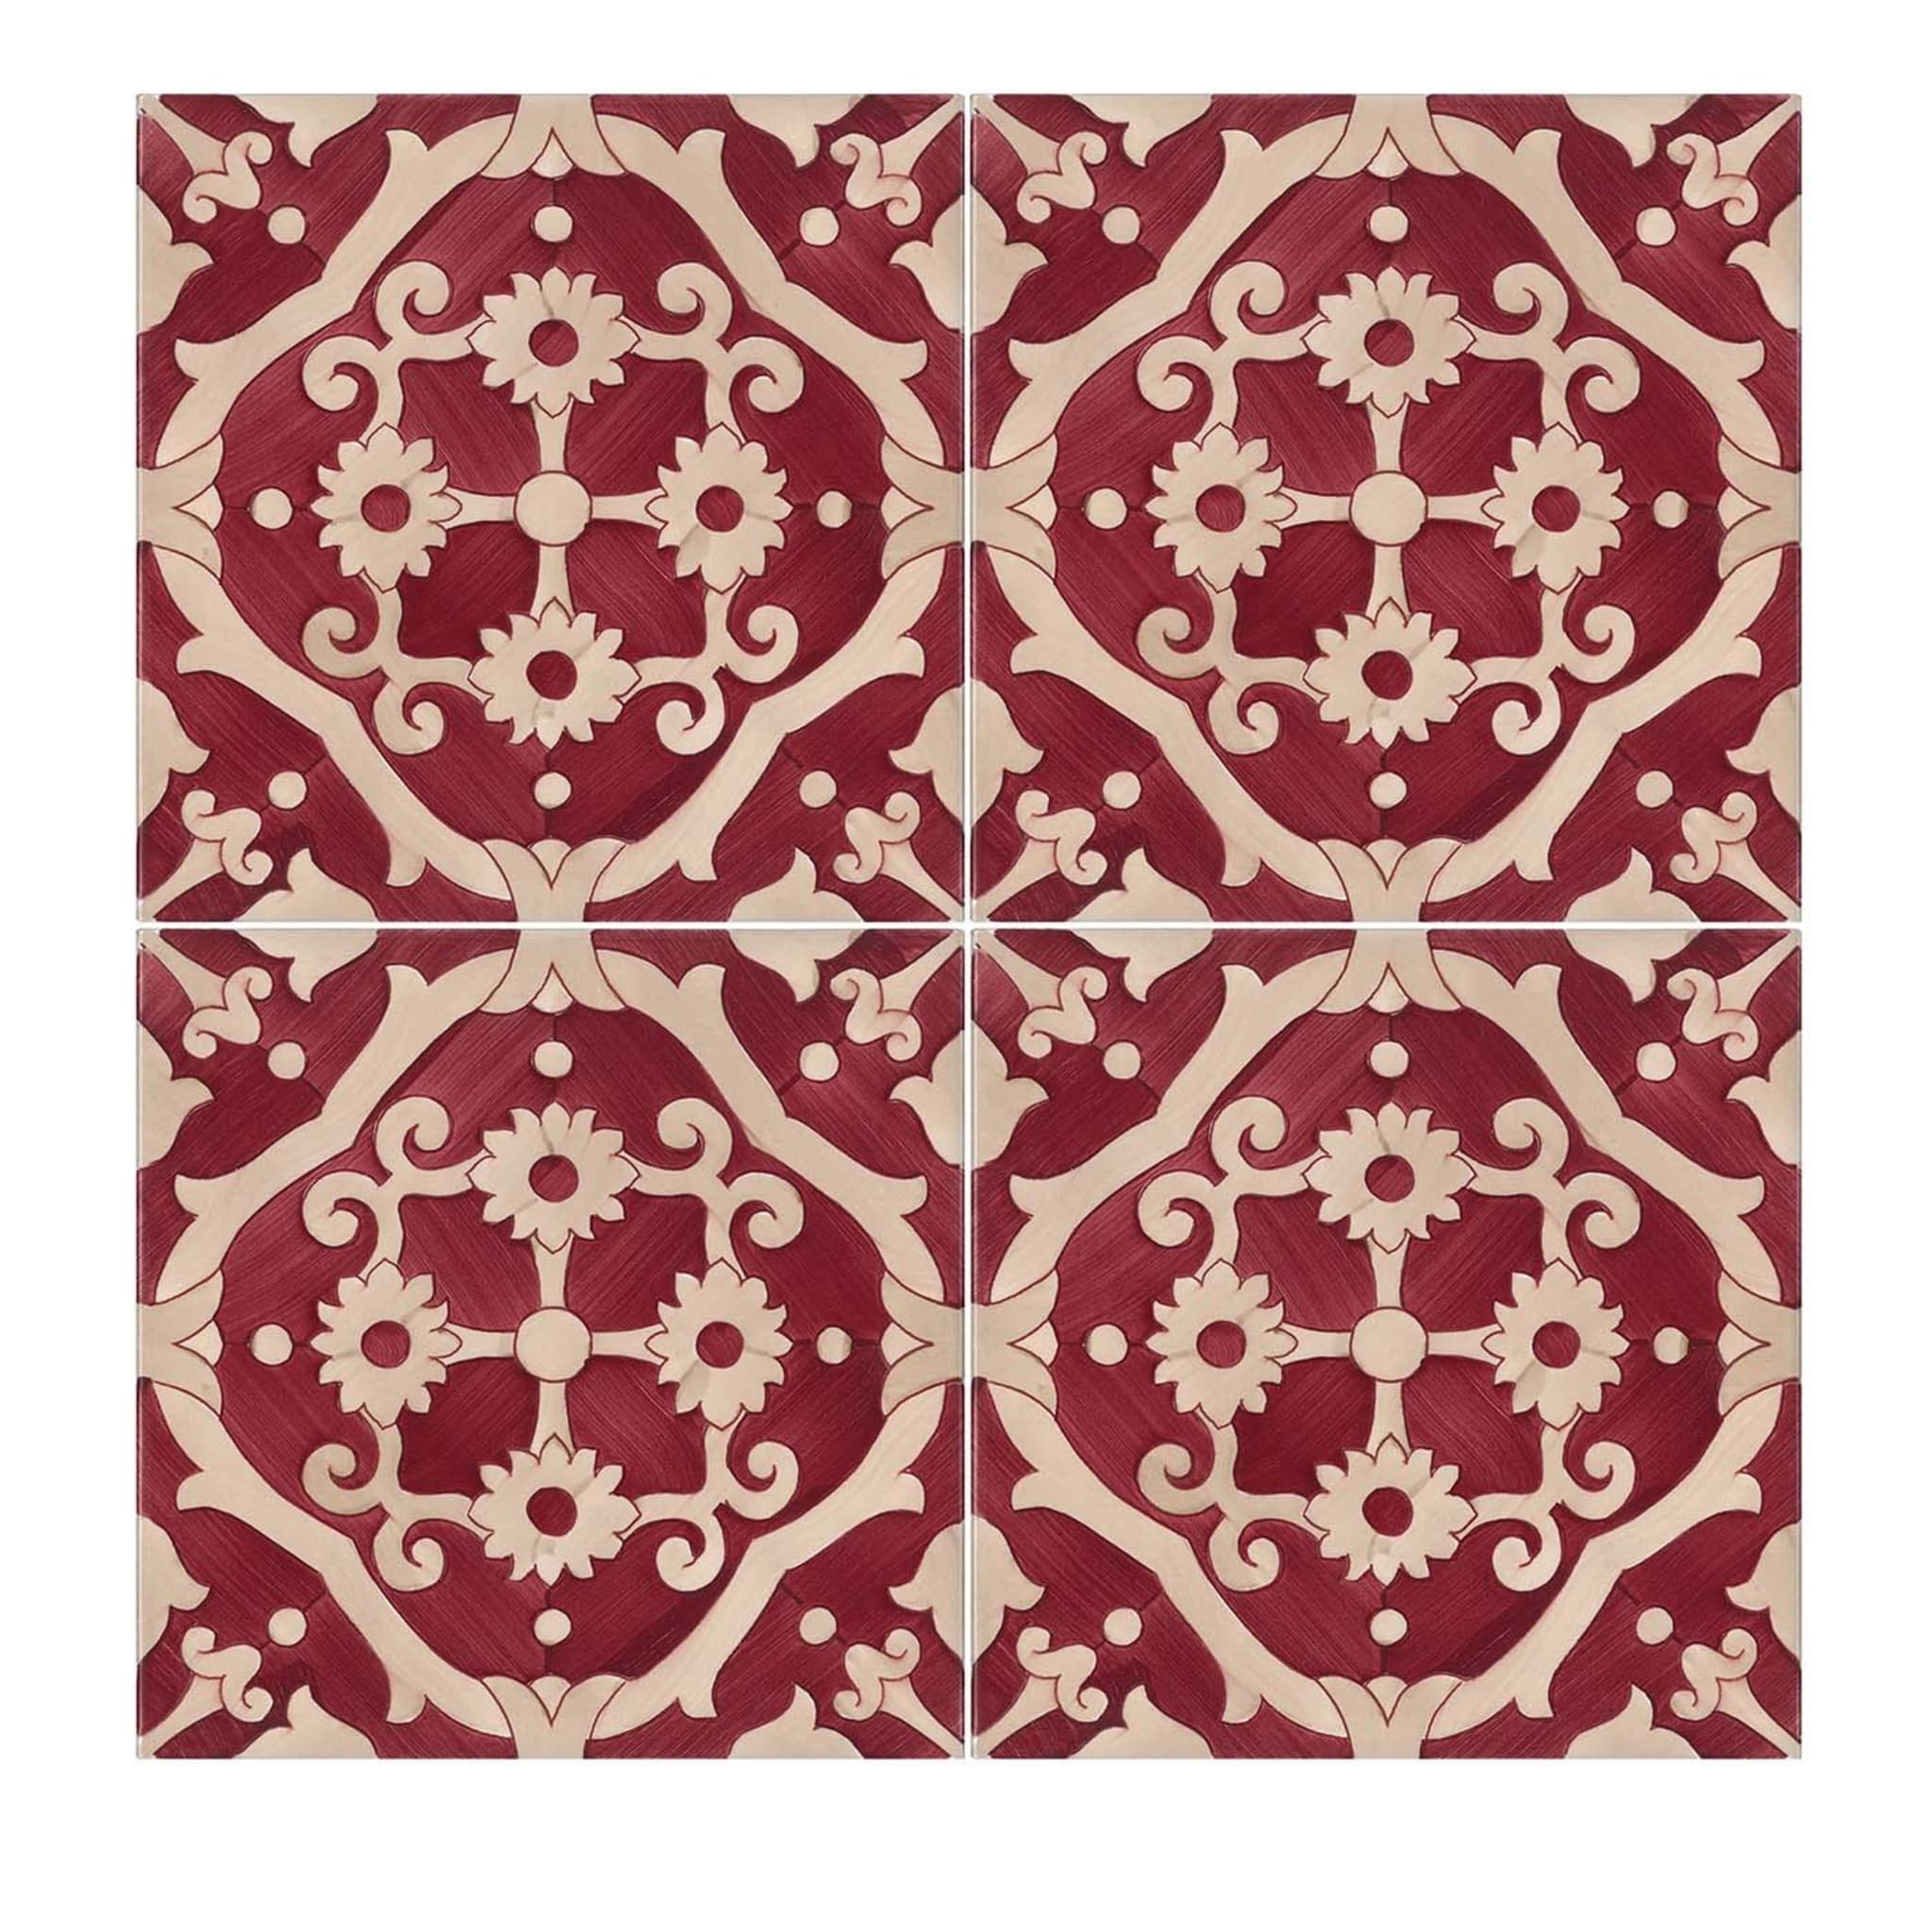 Set of 25 Tovere Red Tiles Fiori Scuri Collection - Main view